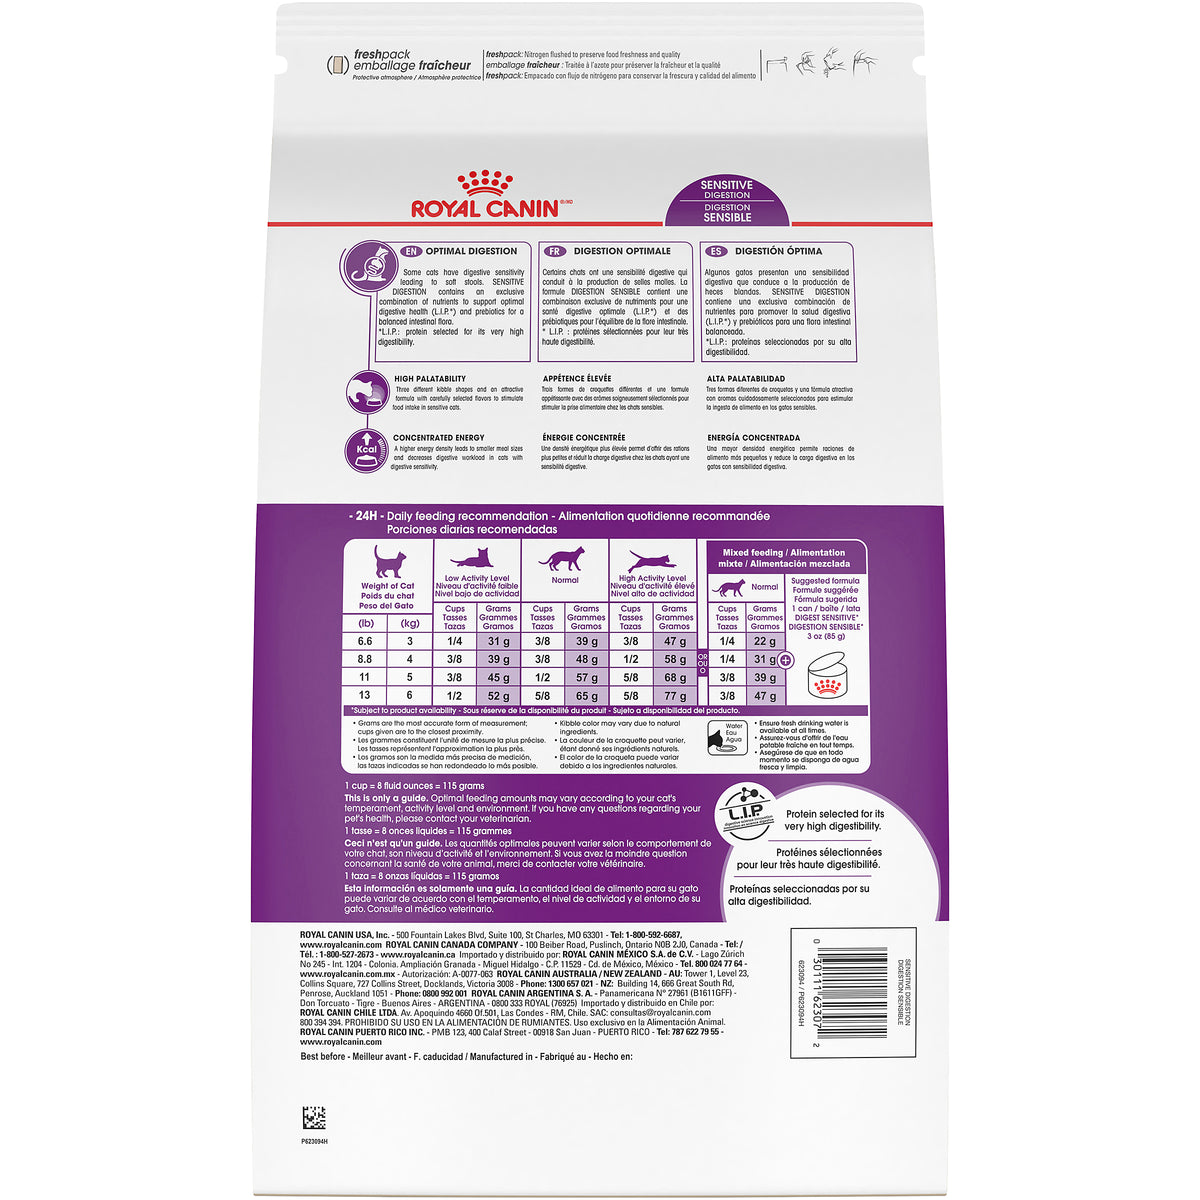 Royal Canin Sensitive Digestion / Special Cat Food